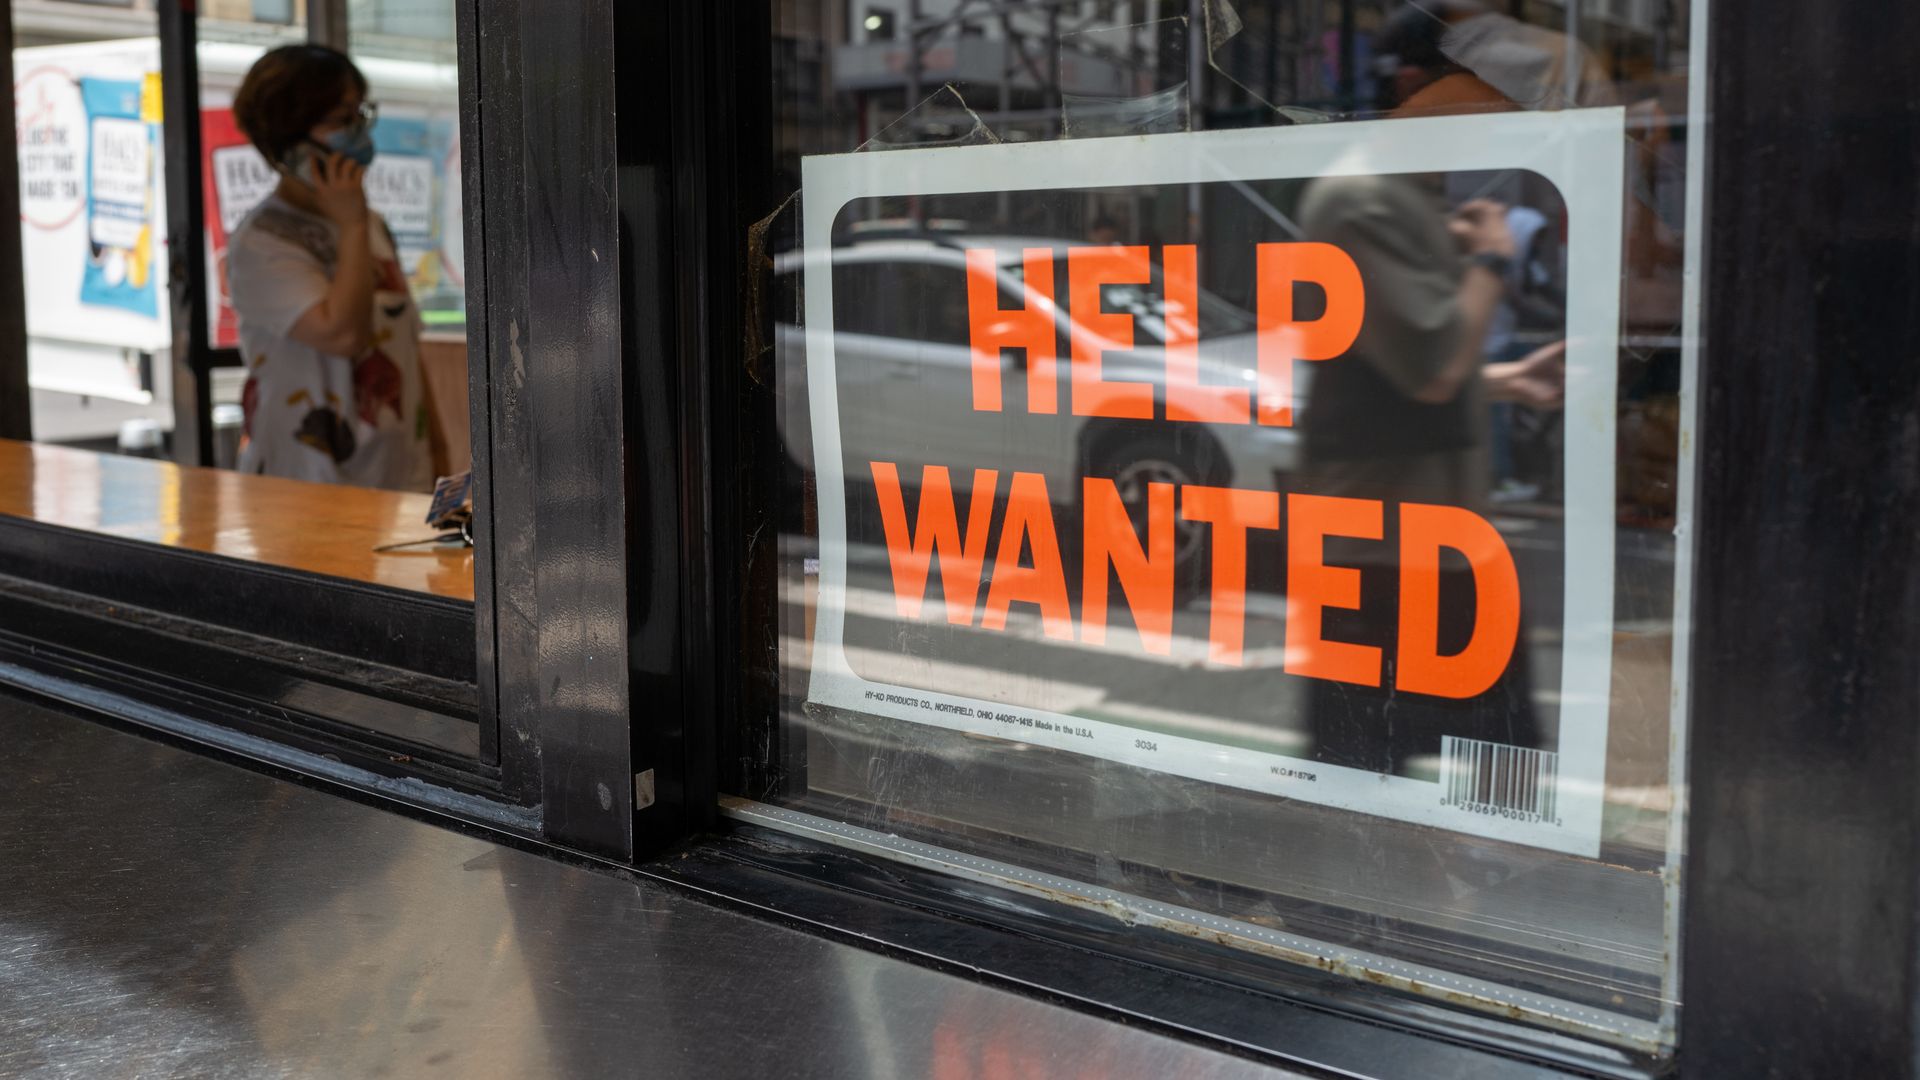 Photo of a "Help wanted" sign displayed in a window